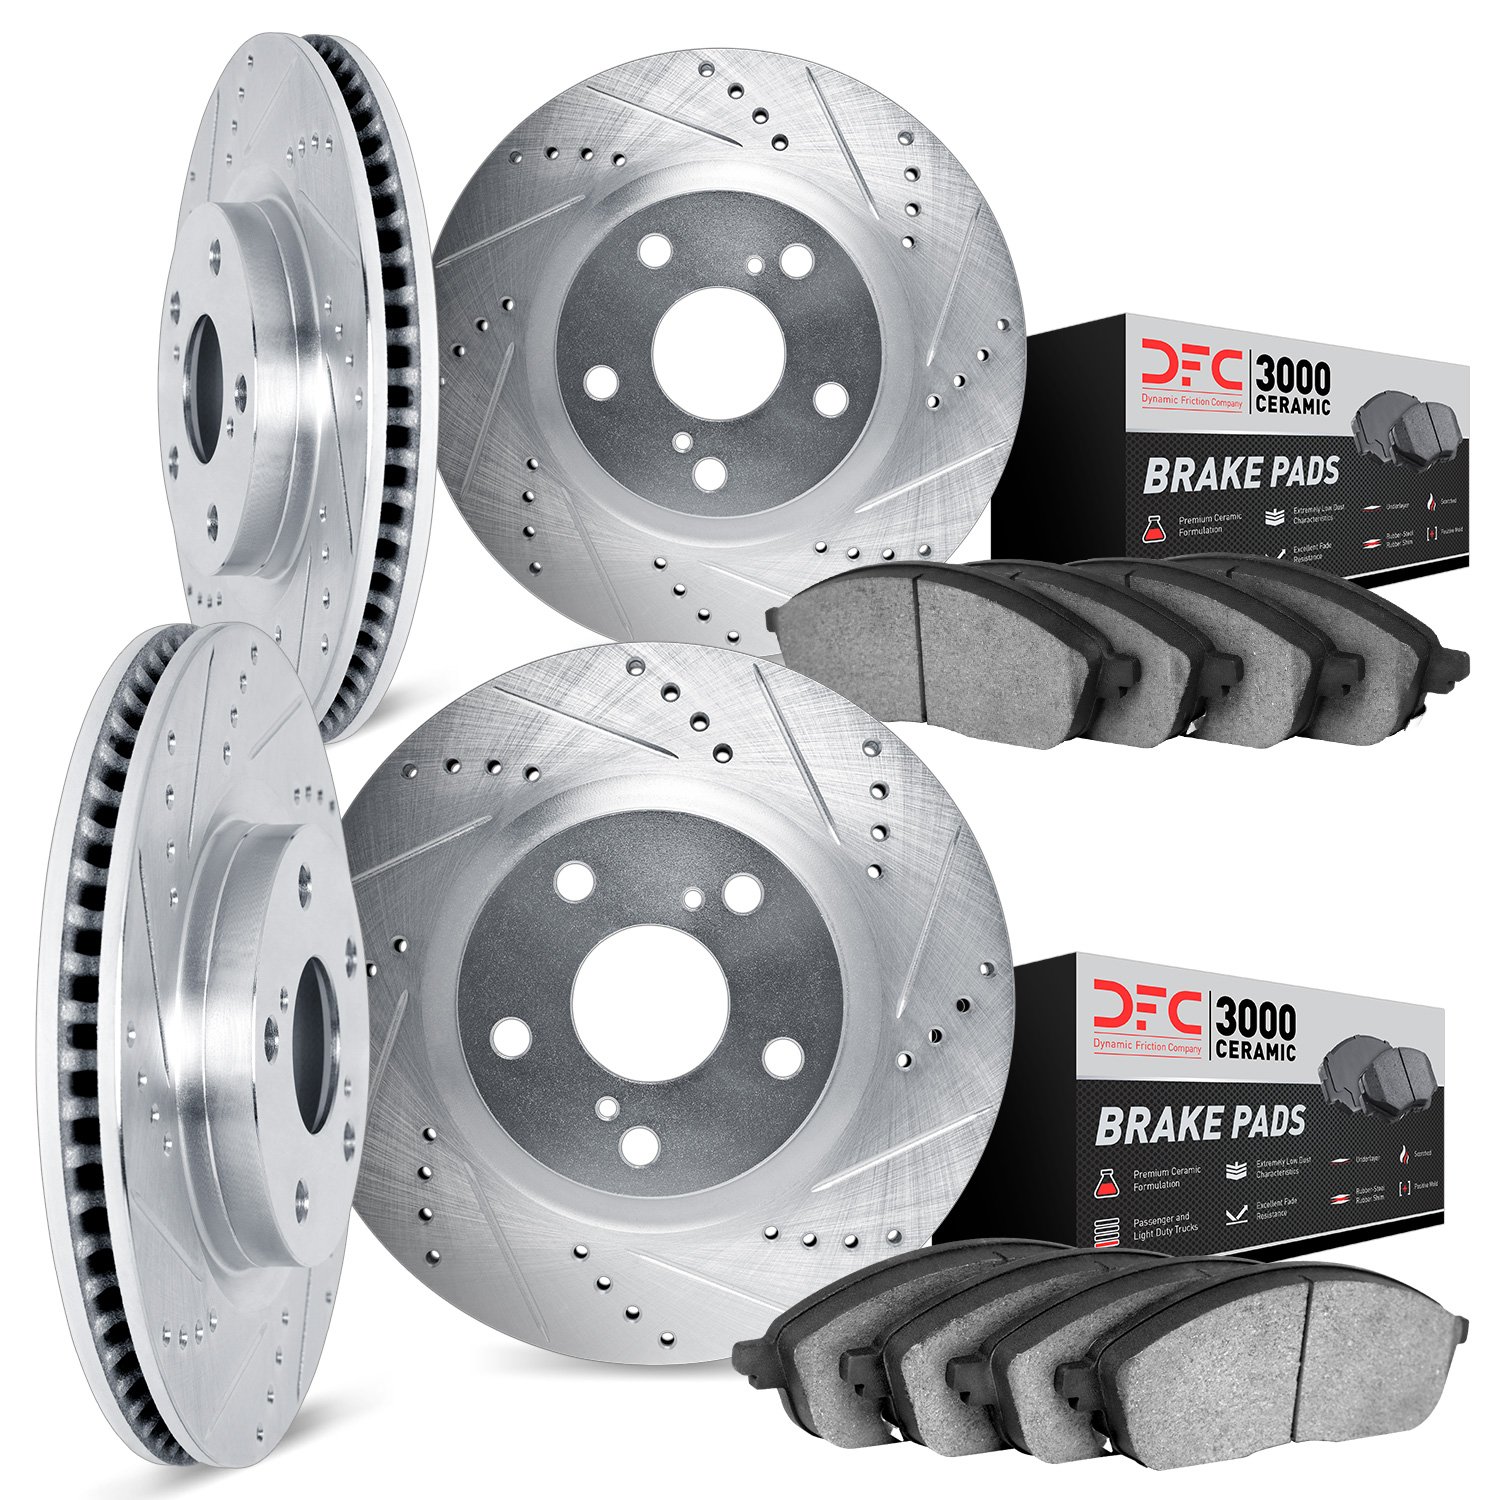 7304-39003 Drilled/Slotted Brake Rotor with 3000-Series Ceramic Brake Pads Kit [Silver], 1991-1995 Mopar, Position: Front and Re